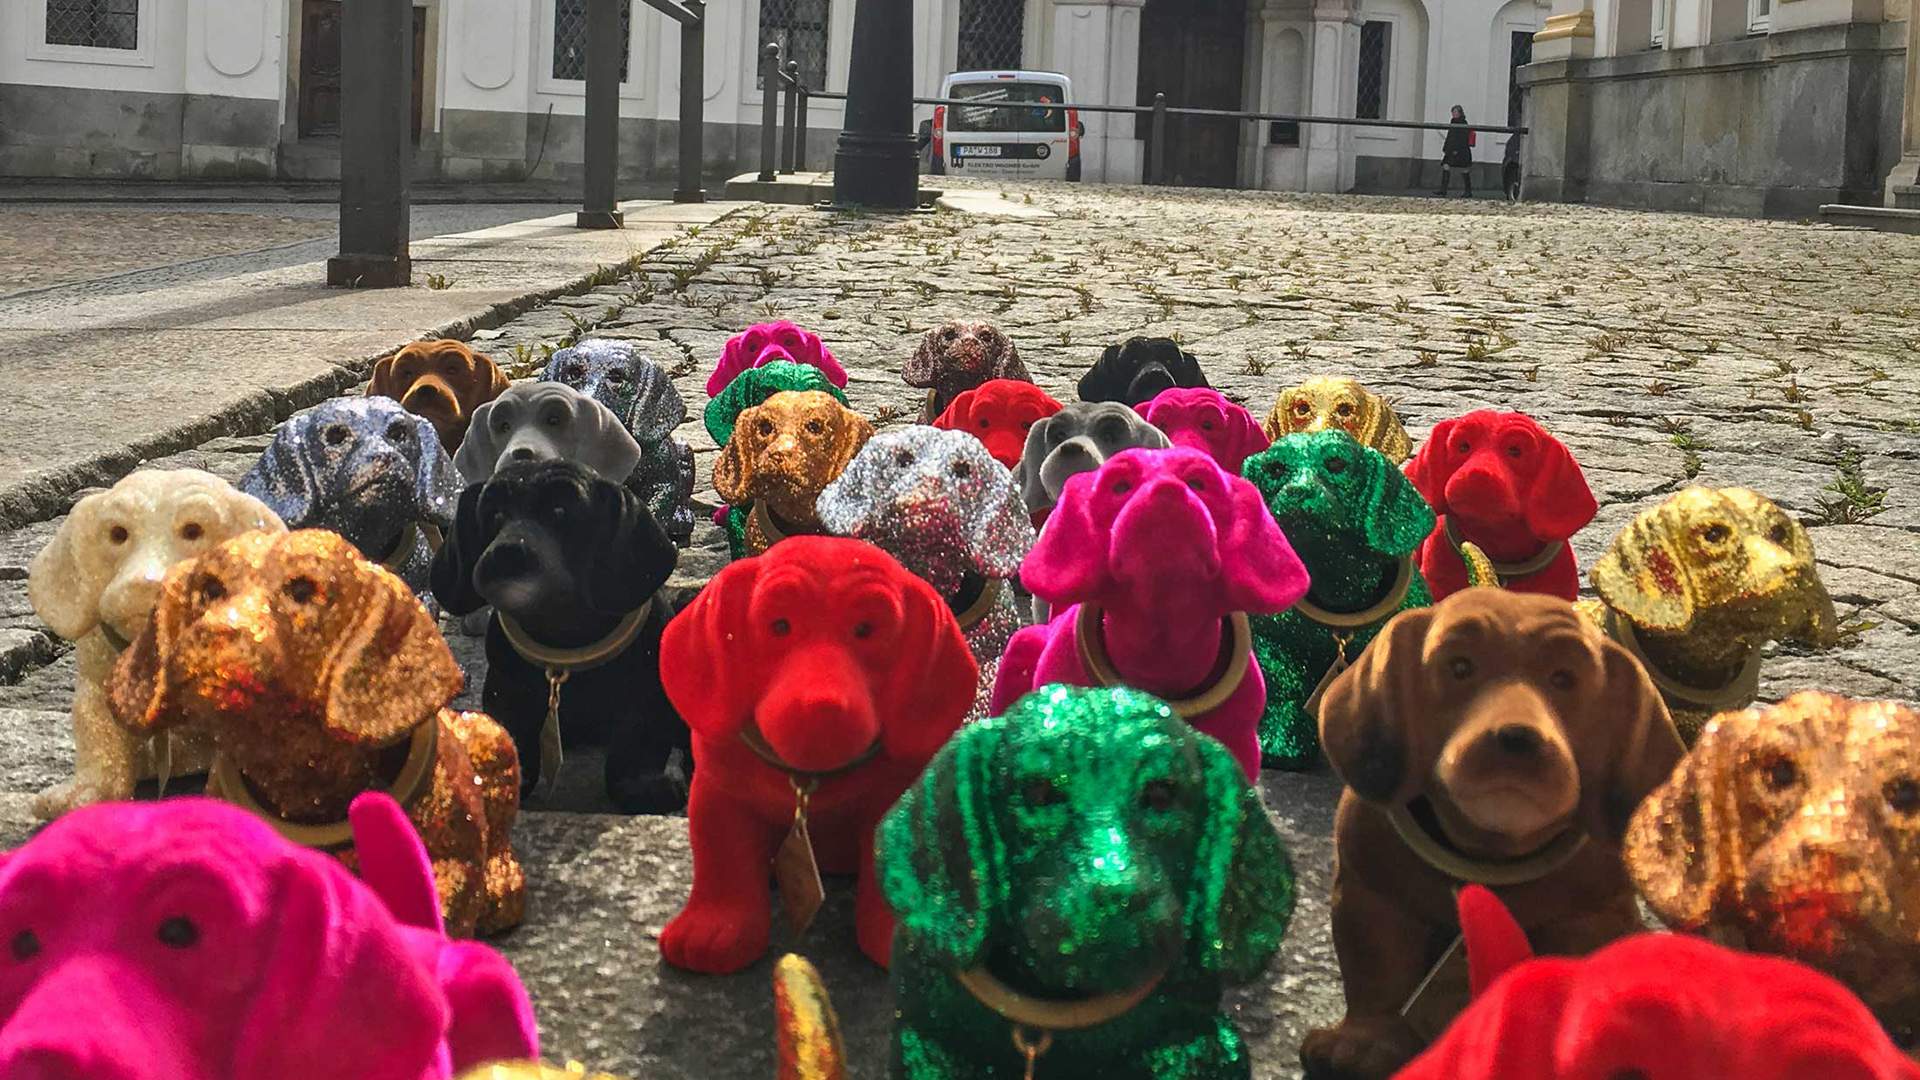 A Museum Dedicated to Dachshunds Has Opened in Germany